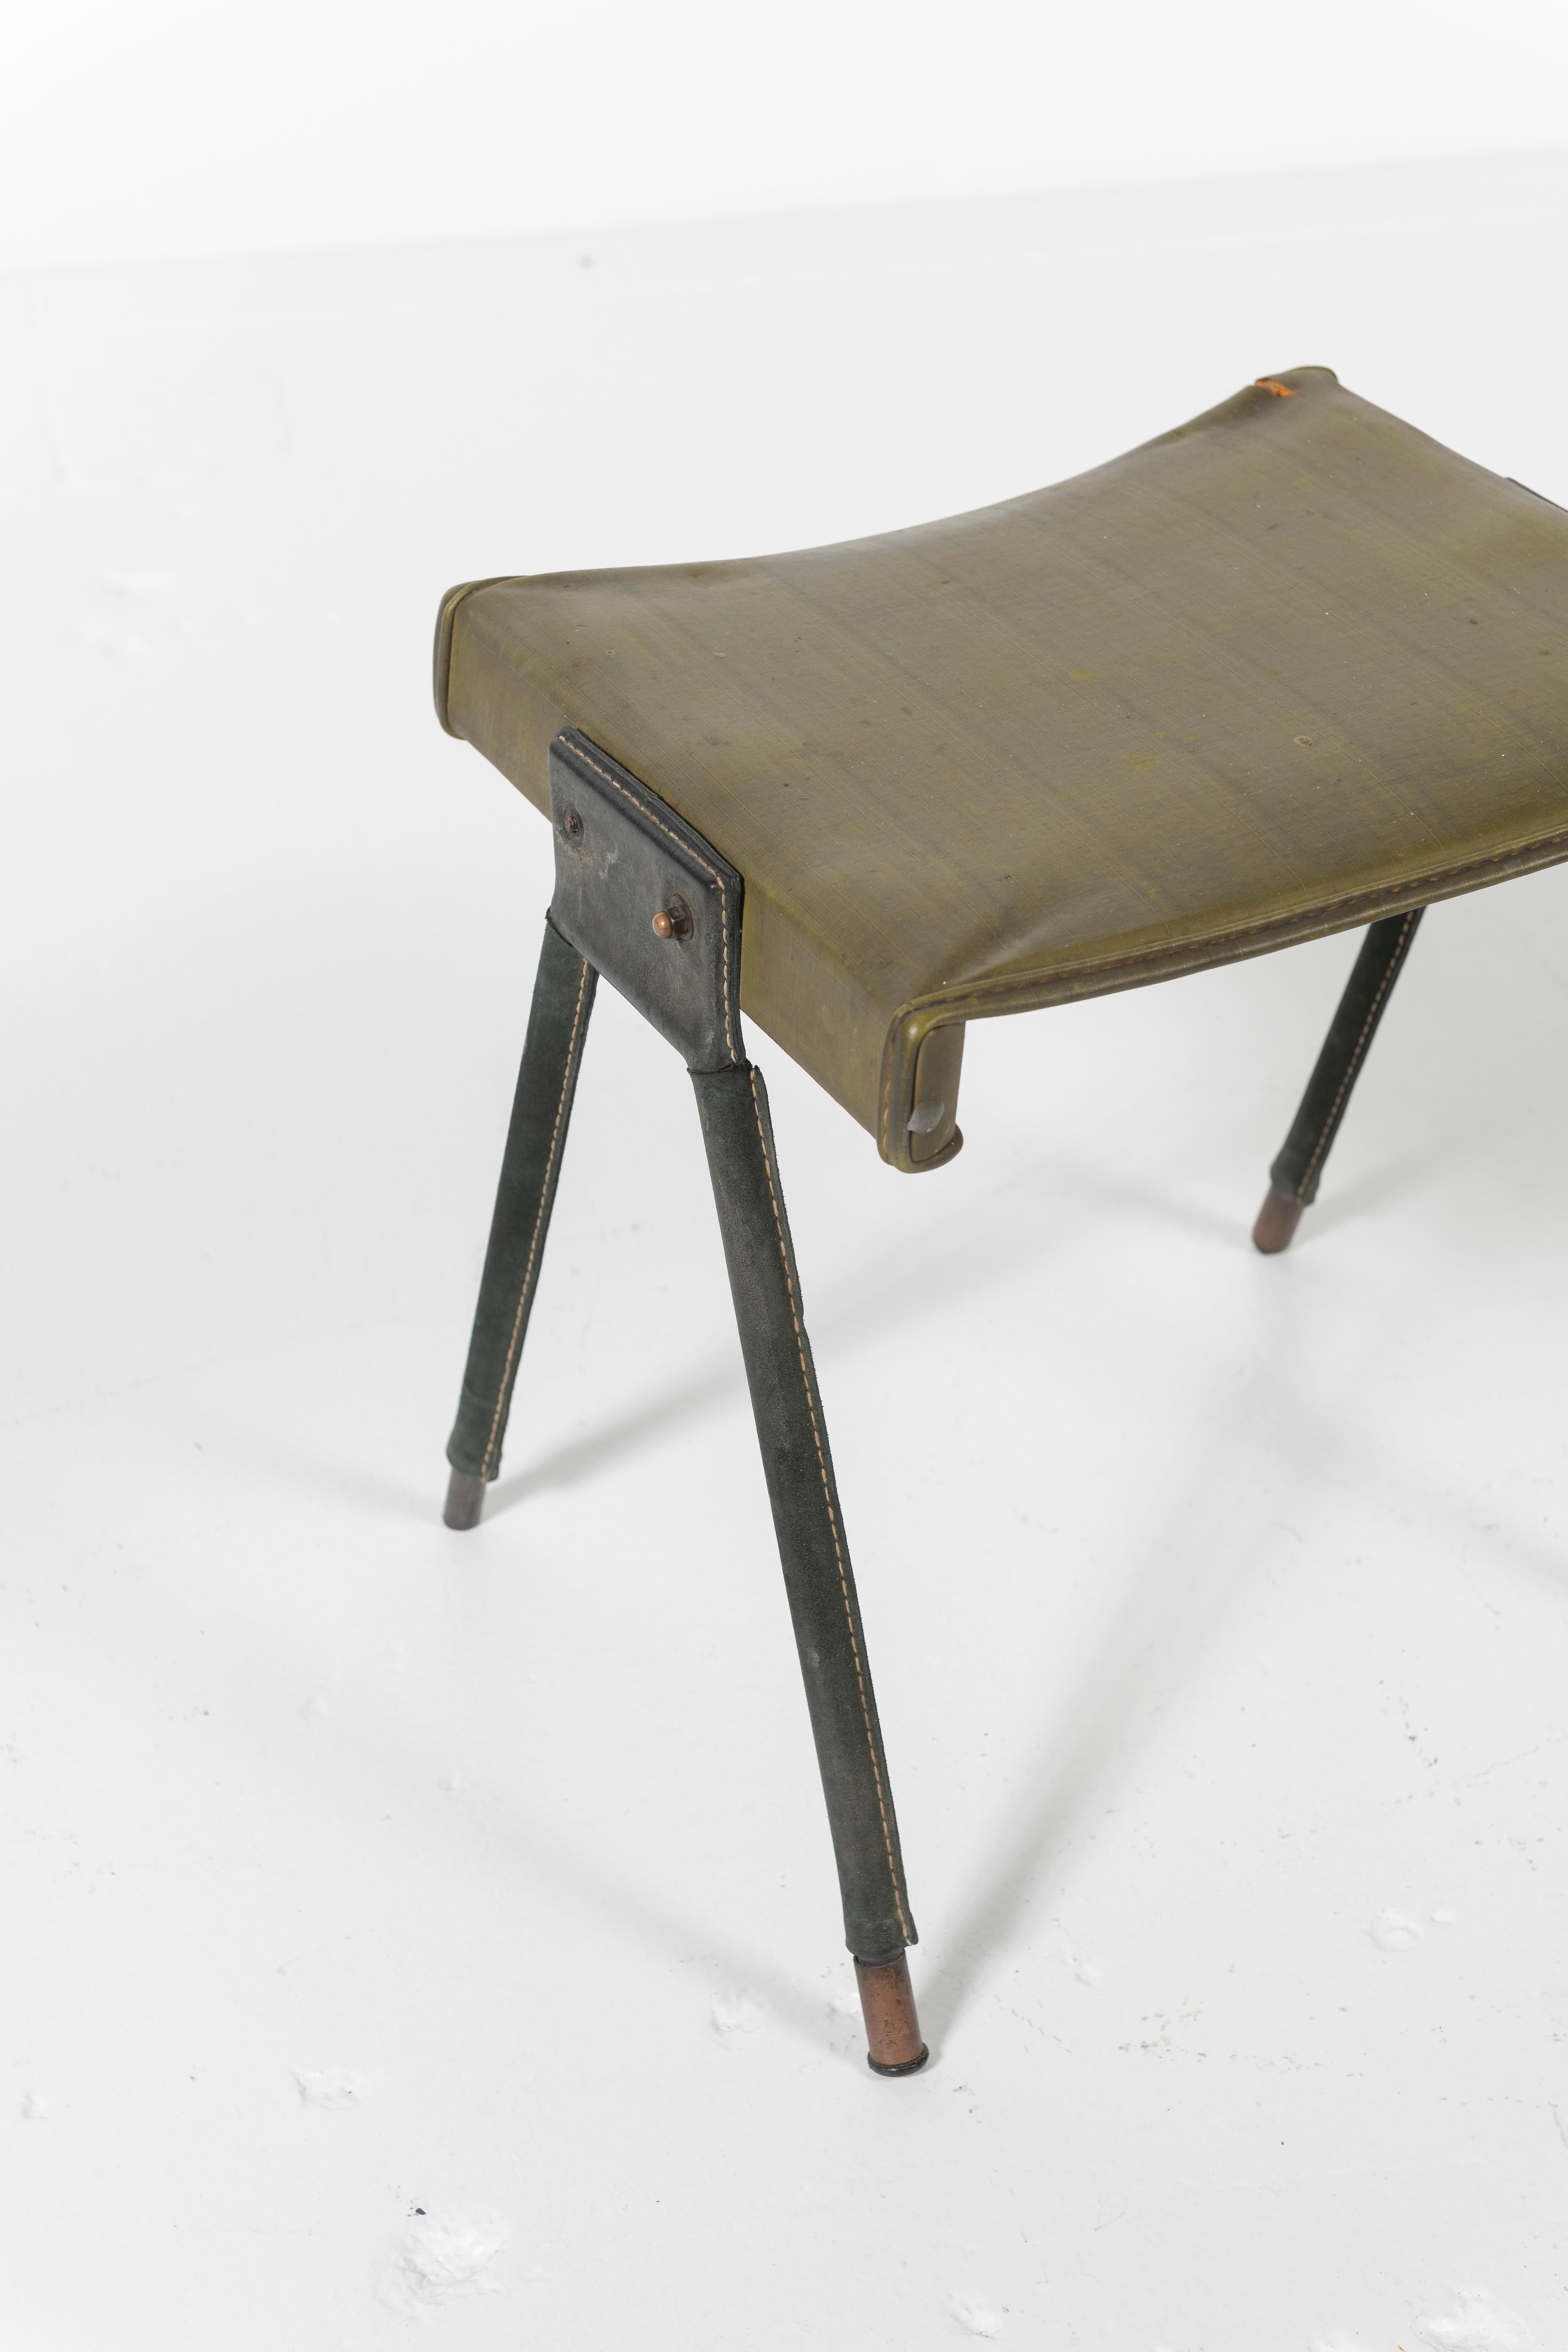 Mid-Century Modern Jacques Adnet Stool Covered in Green Leather with Saddlestiching